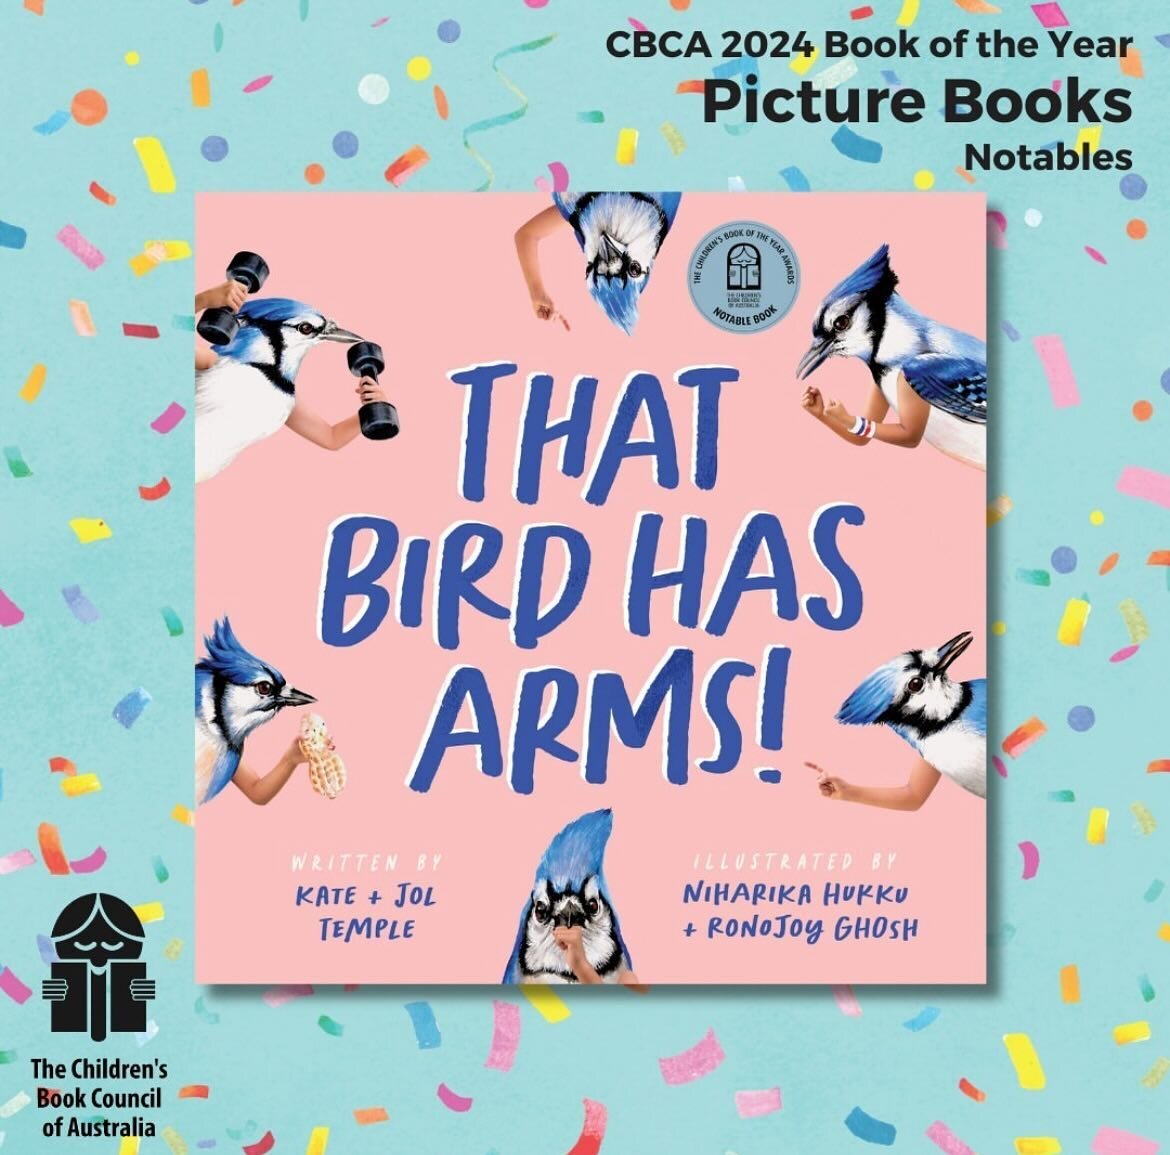 Wow!!!! That Bird Has Arms! has been listed as a notable for Picture Book of The Year at the @cbcaustralia 🐦 💪 🎉 We are super thrilled because THIS weird little book was a true labour of love and a collage of effort. The beautiful illustrations ar